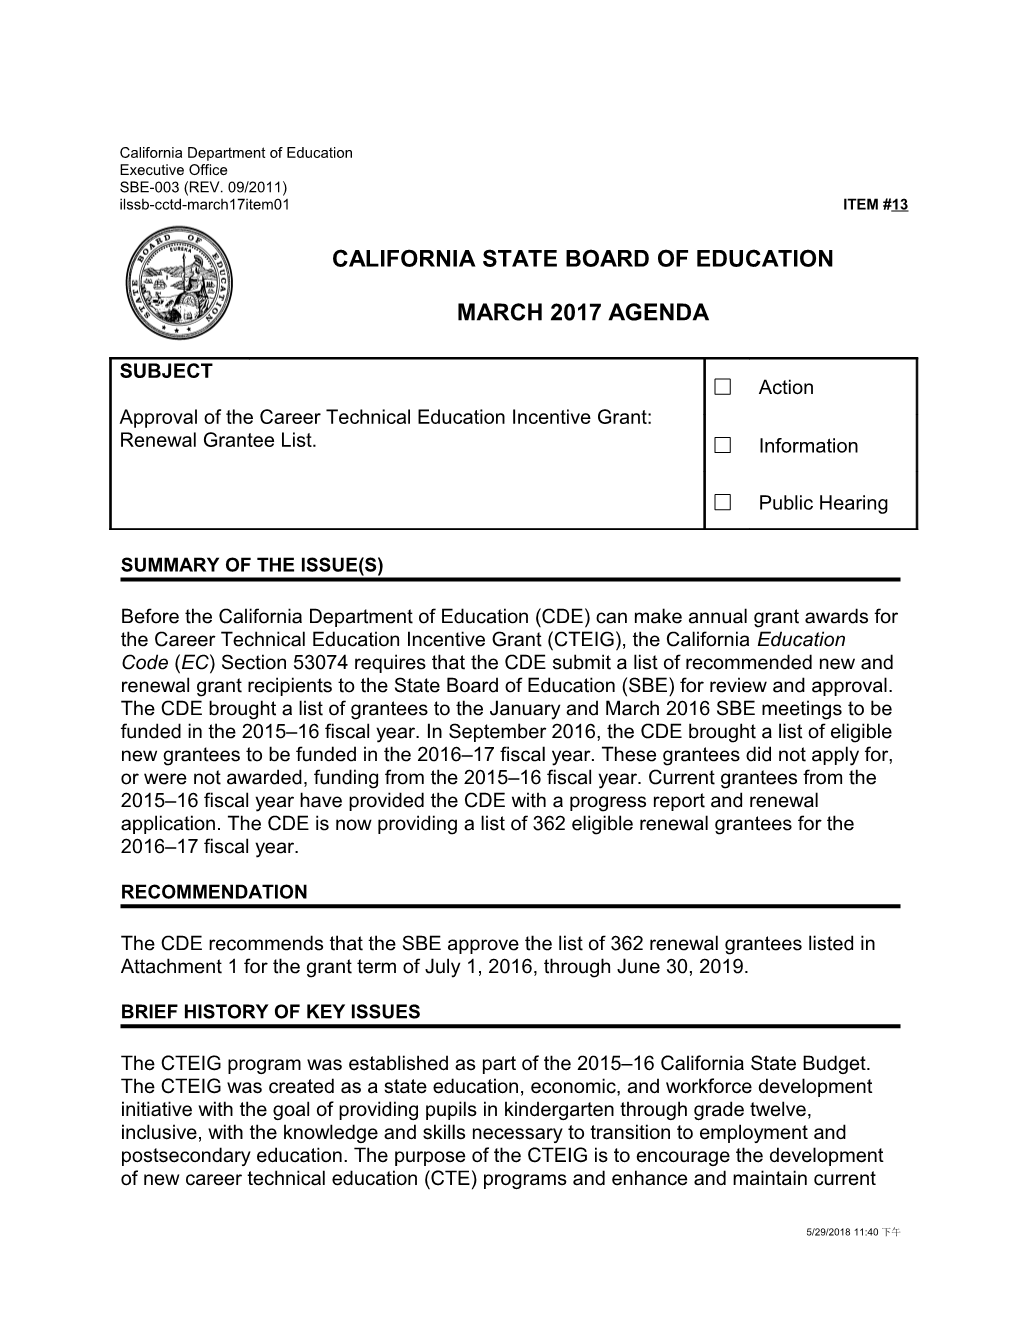 March 2017 Agenda Item 13 - Meeting Agendas (CA State Board of Education)